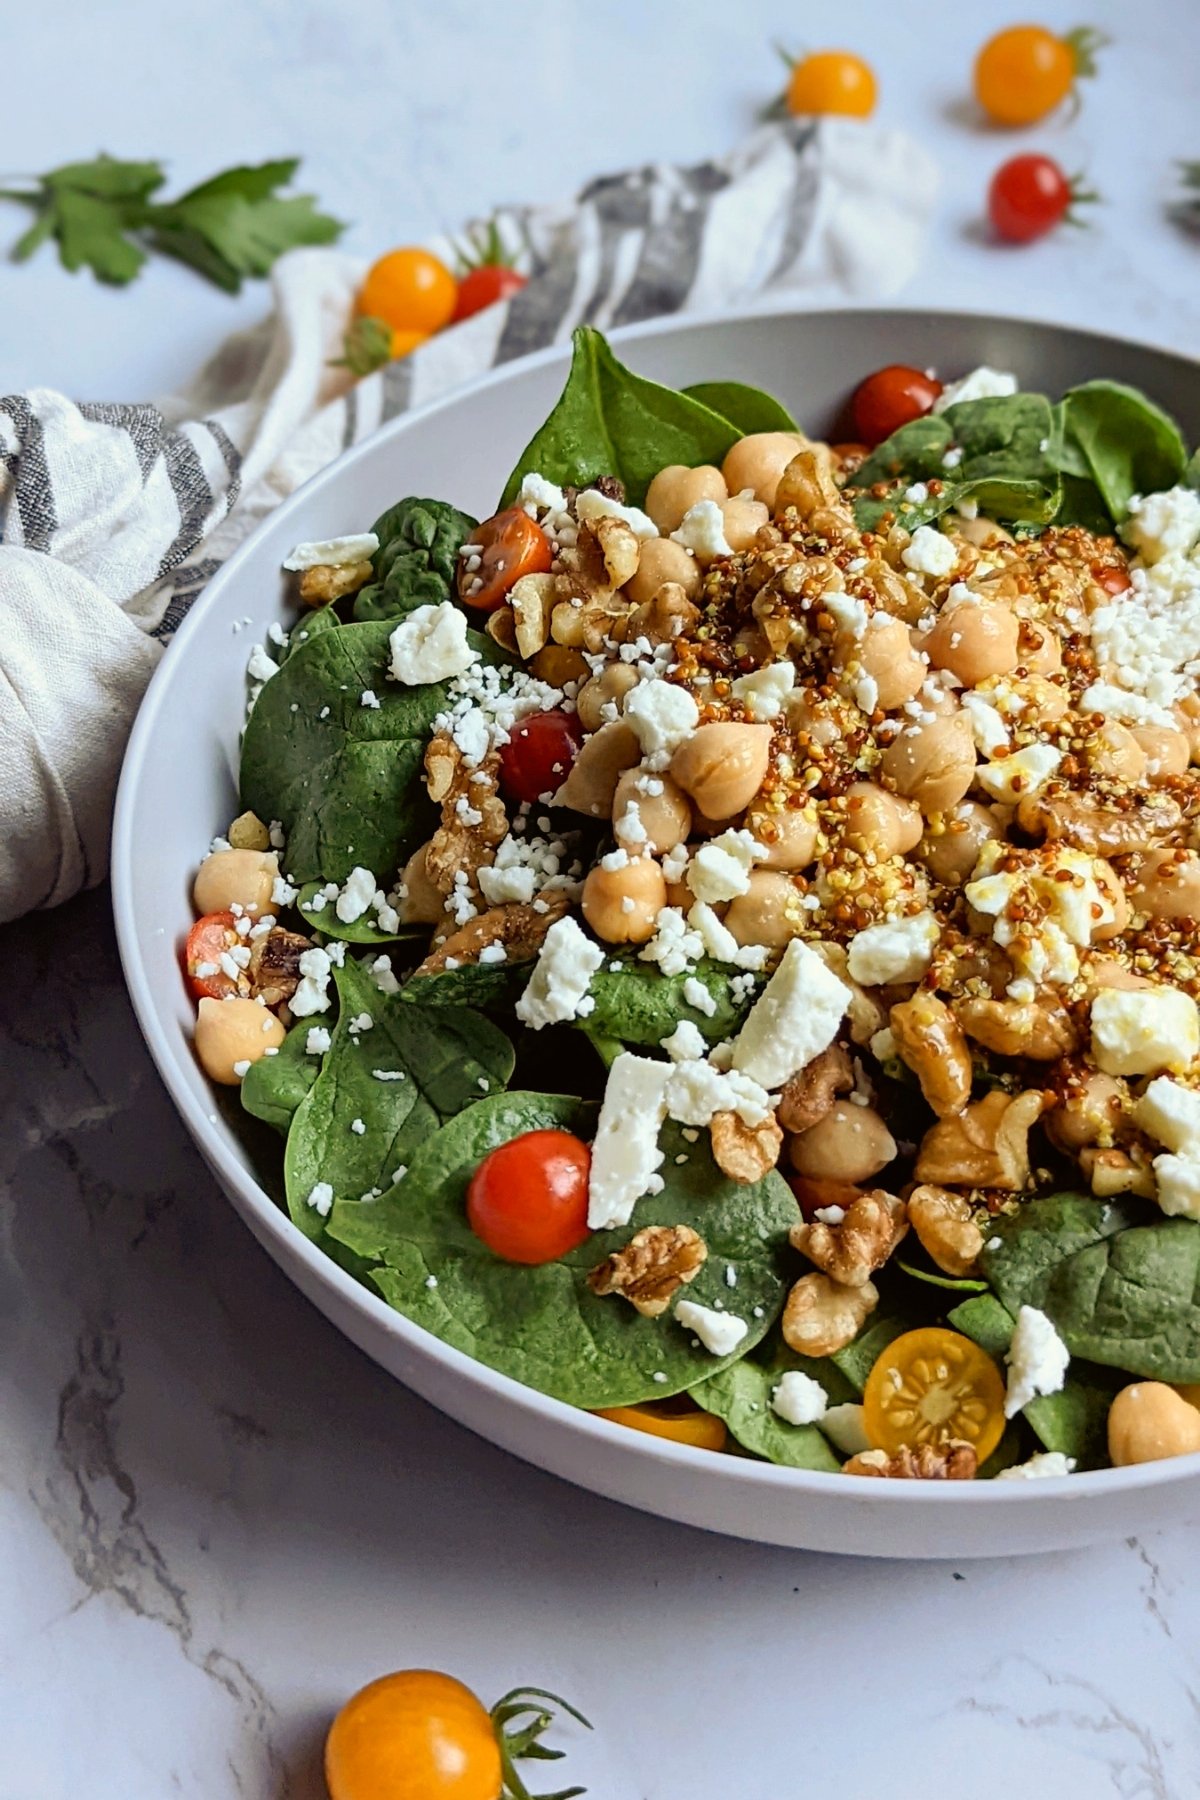 chickpea salad with spinach feta cheese garbanzo bean and spinach salad with tomatoes and dijon mustard dressing